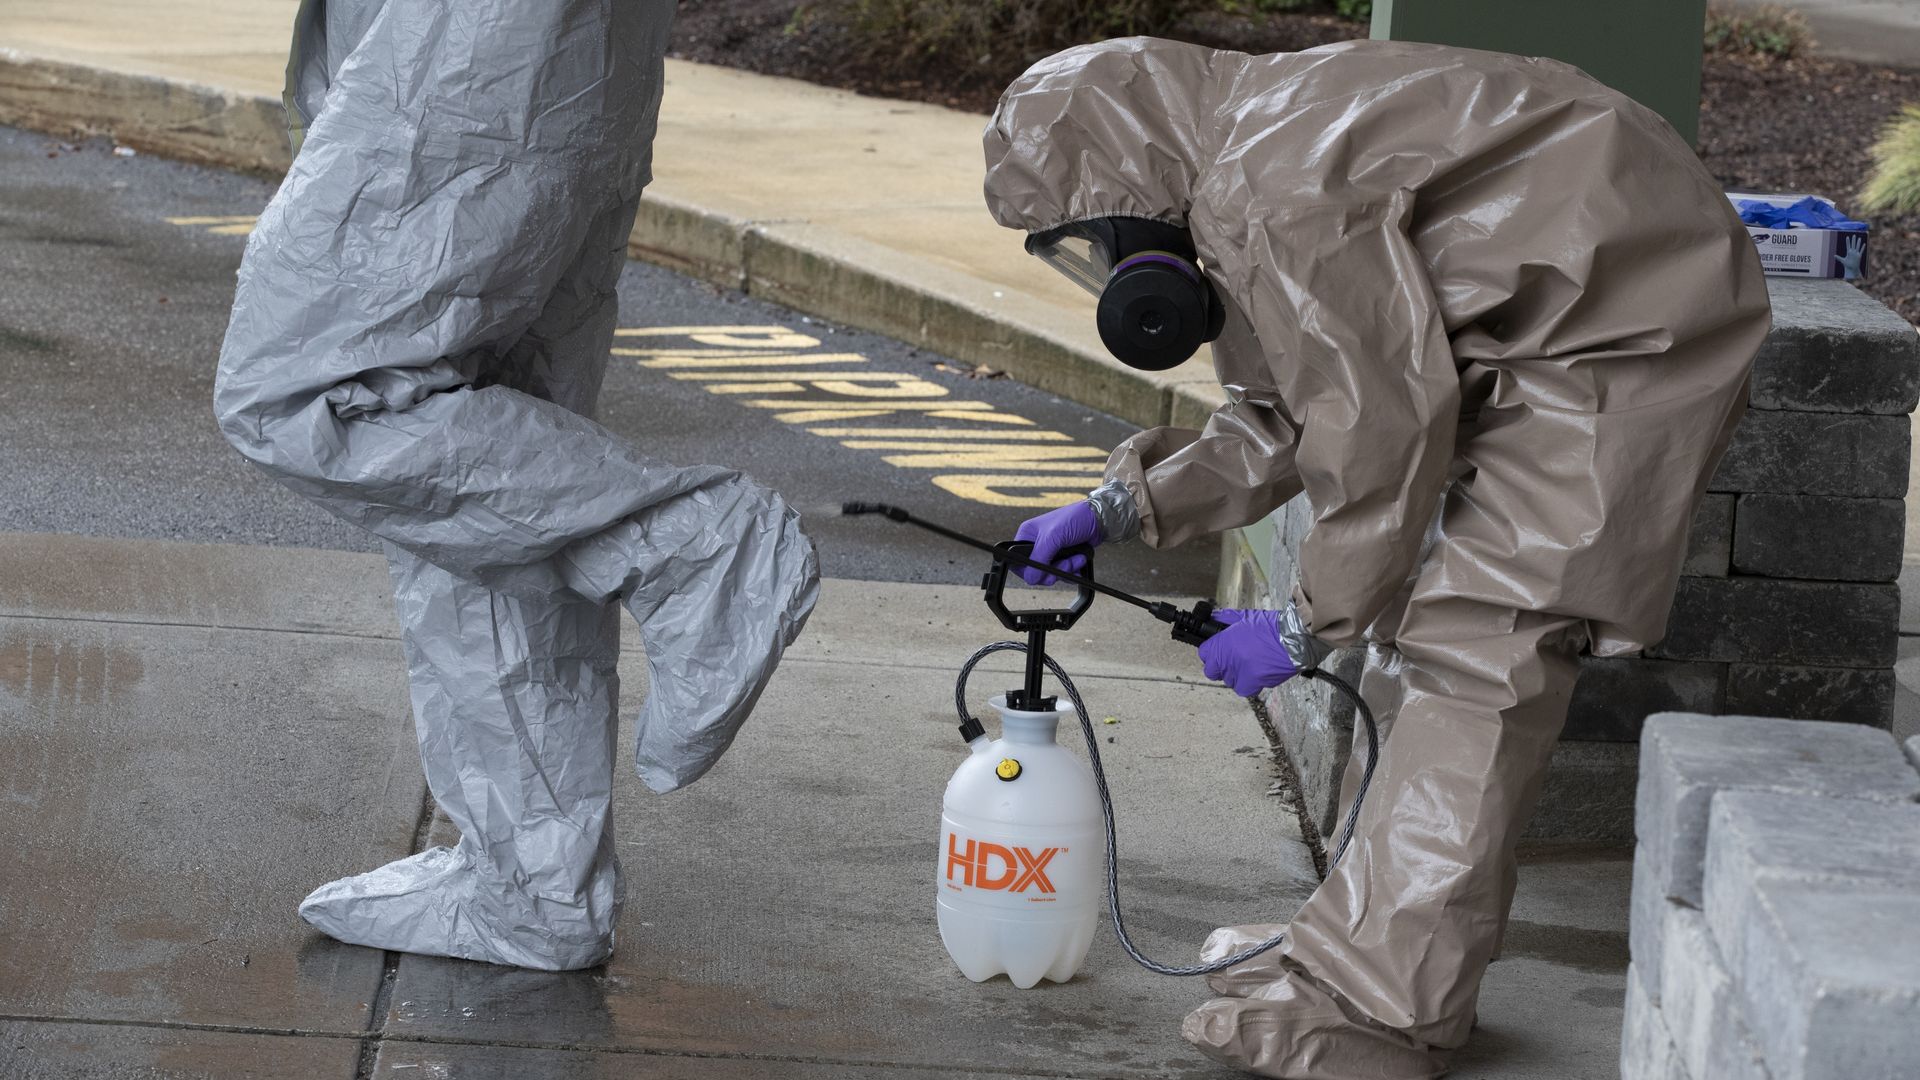 Members of the Massachusetts National Guard remove their hazmat suits 